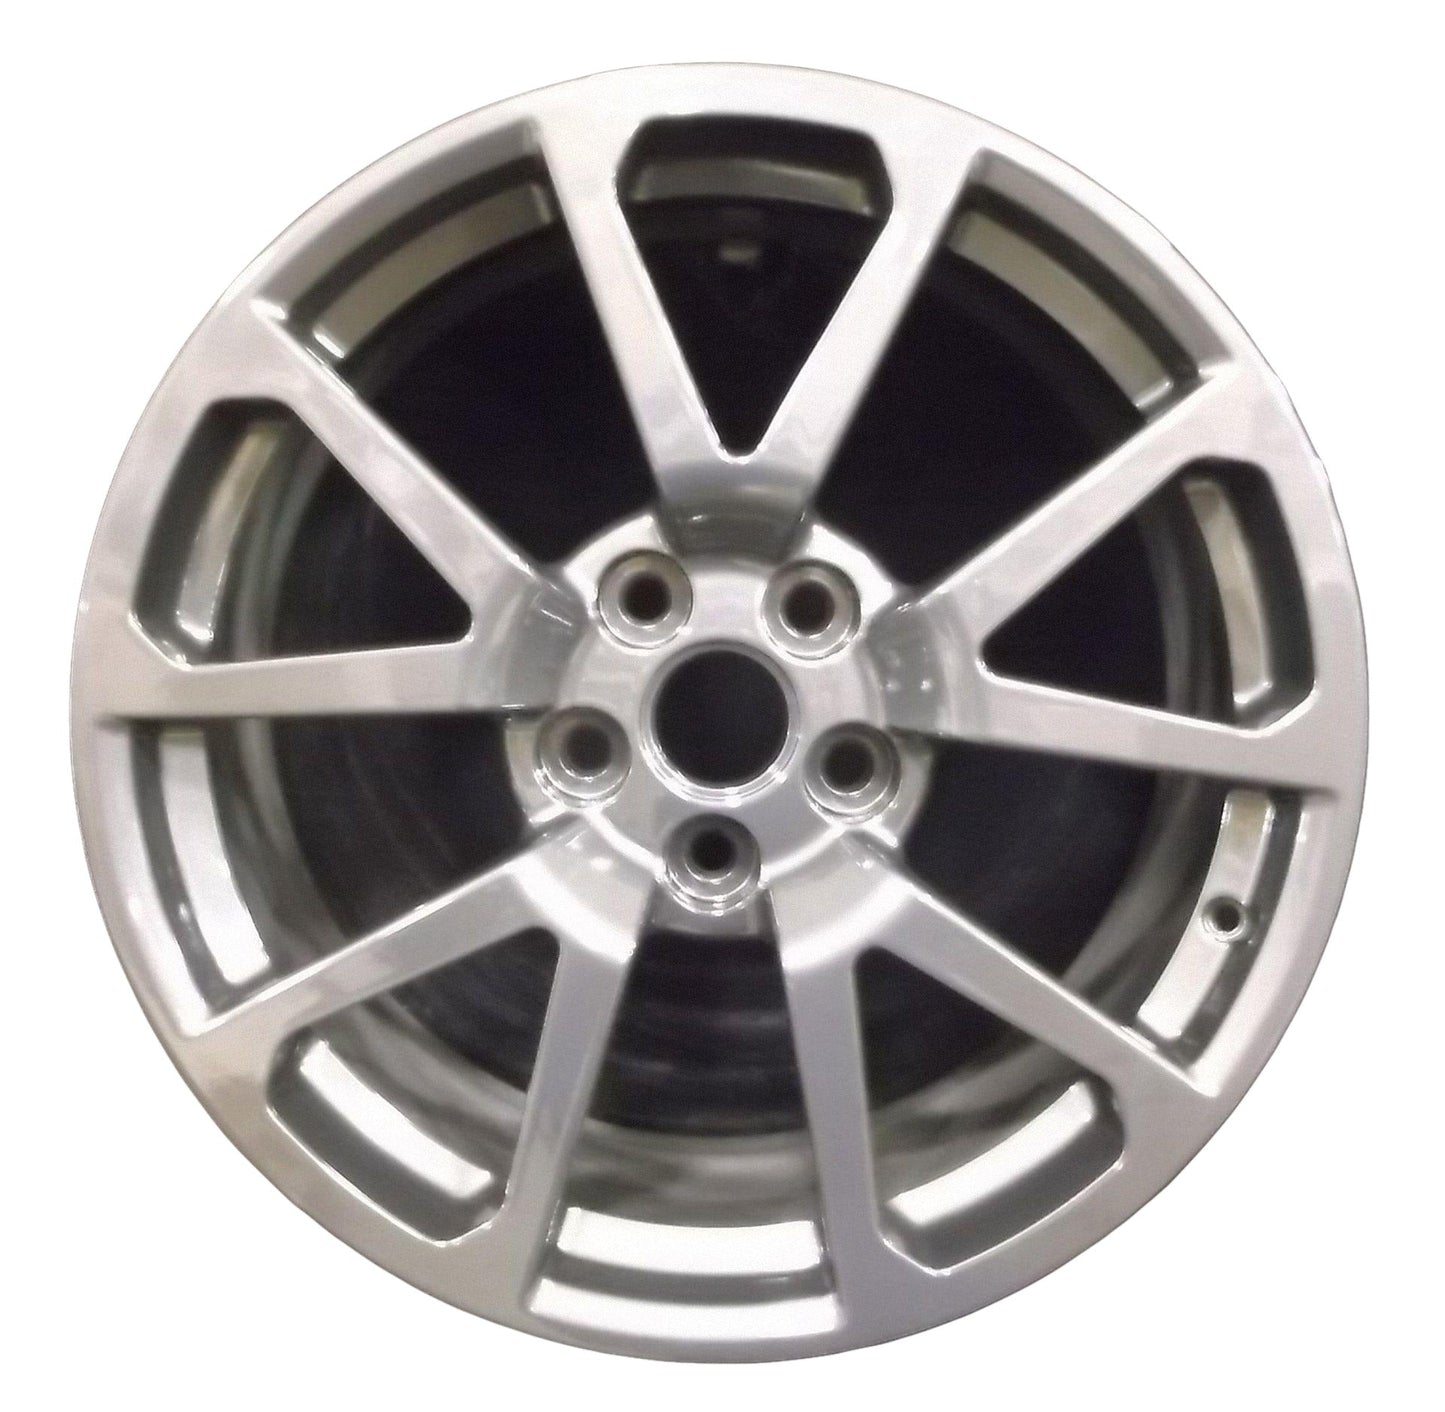 Cadillac CTS  2009, 2010, 2011, 2012, 2013, 2014, 2015 Factory OEM Car Wheel Size 19x9 Alloy WAO.4648.LC55.FF